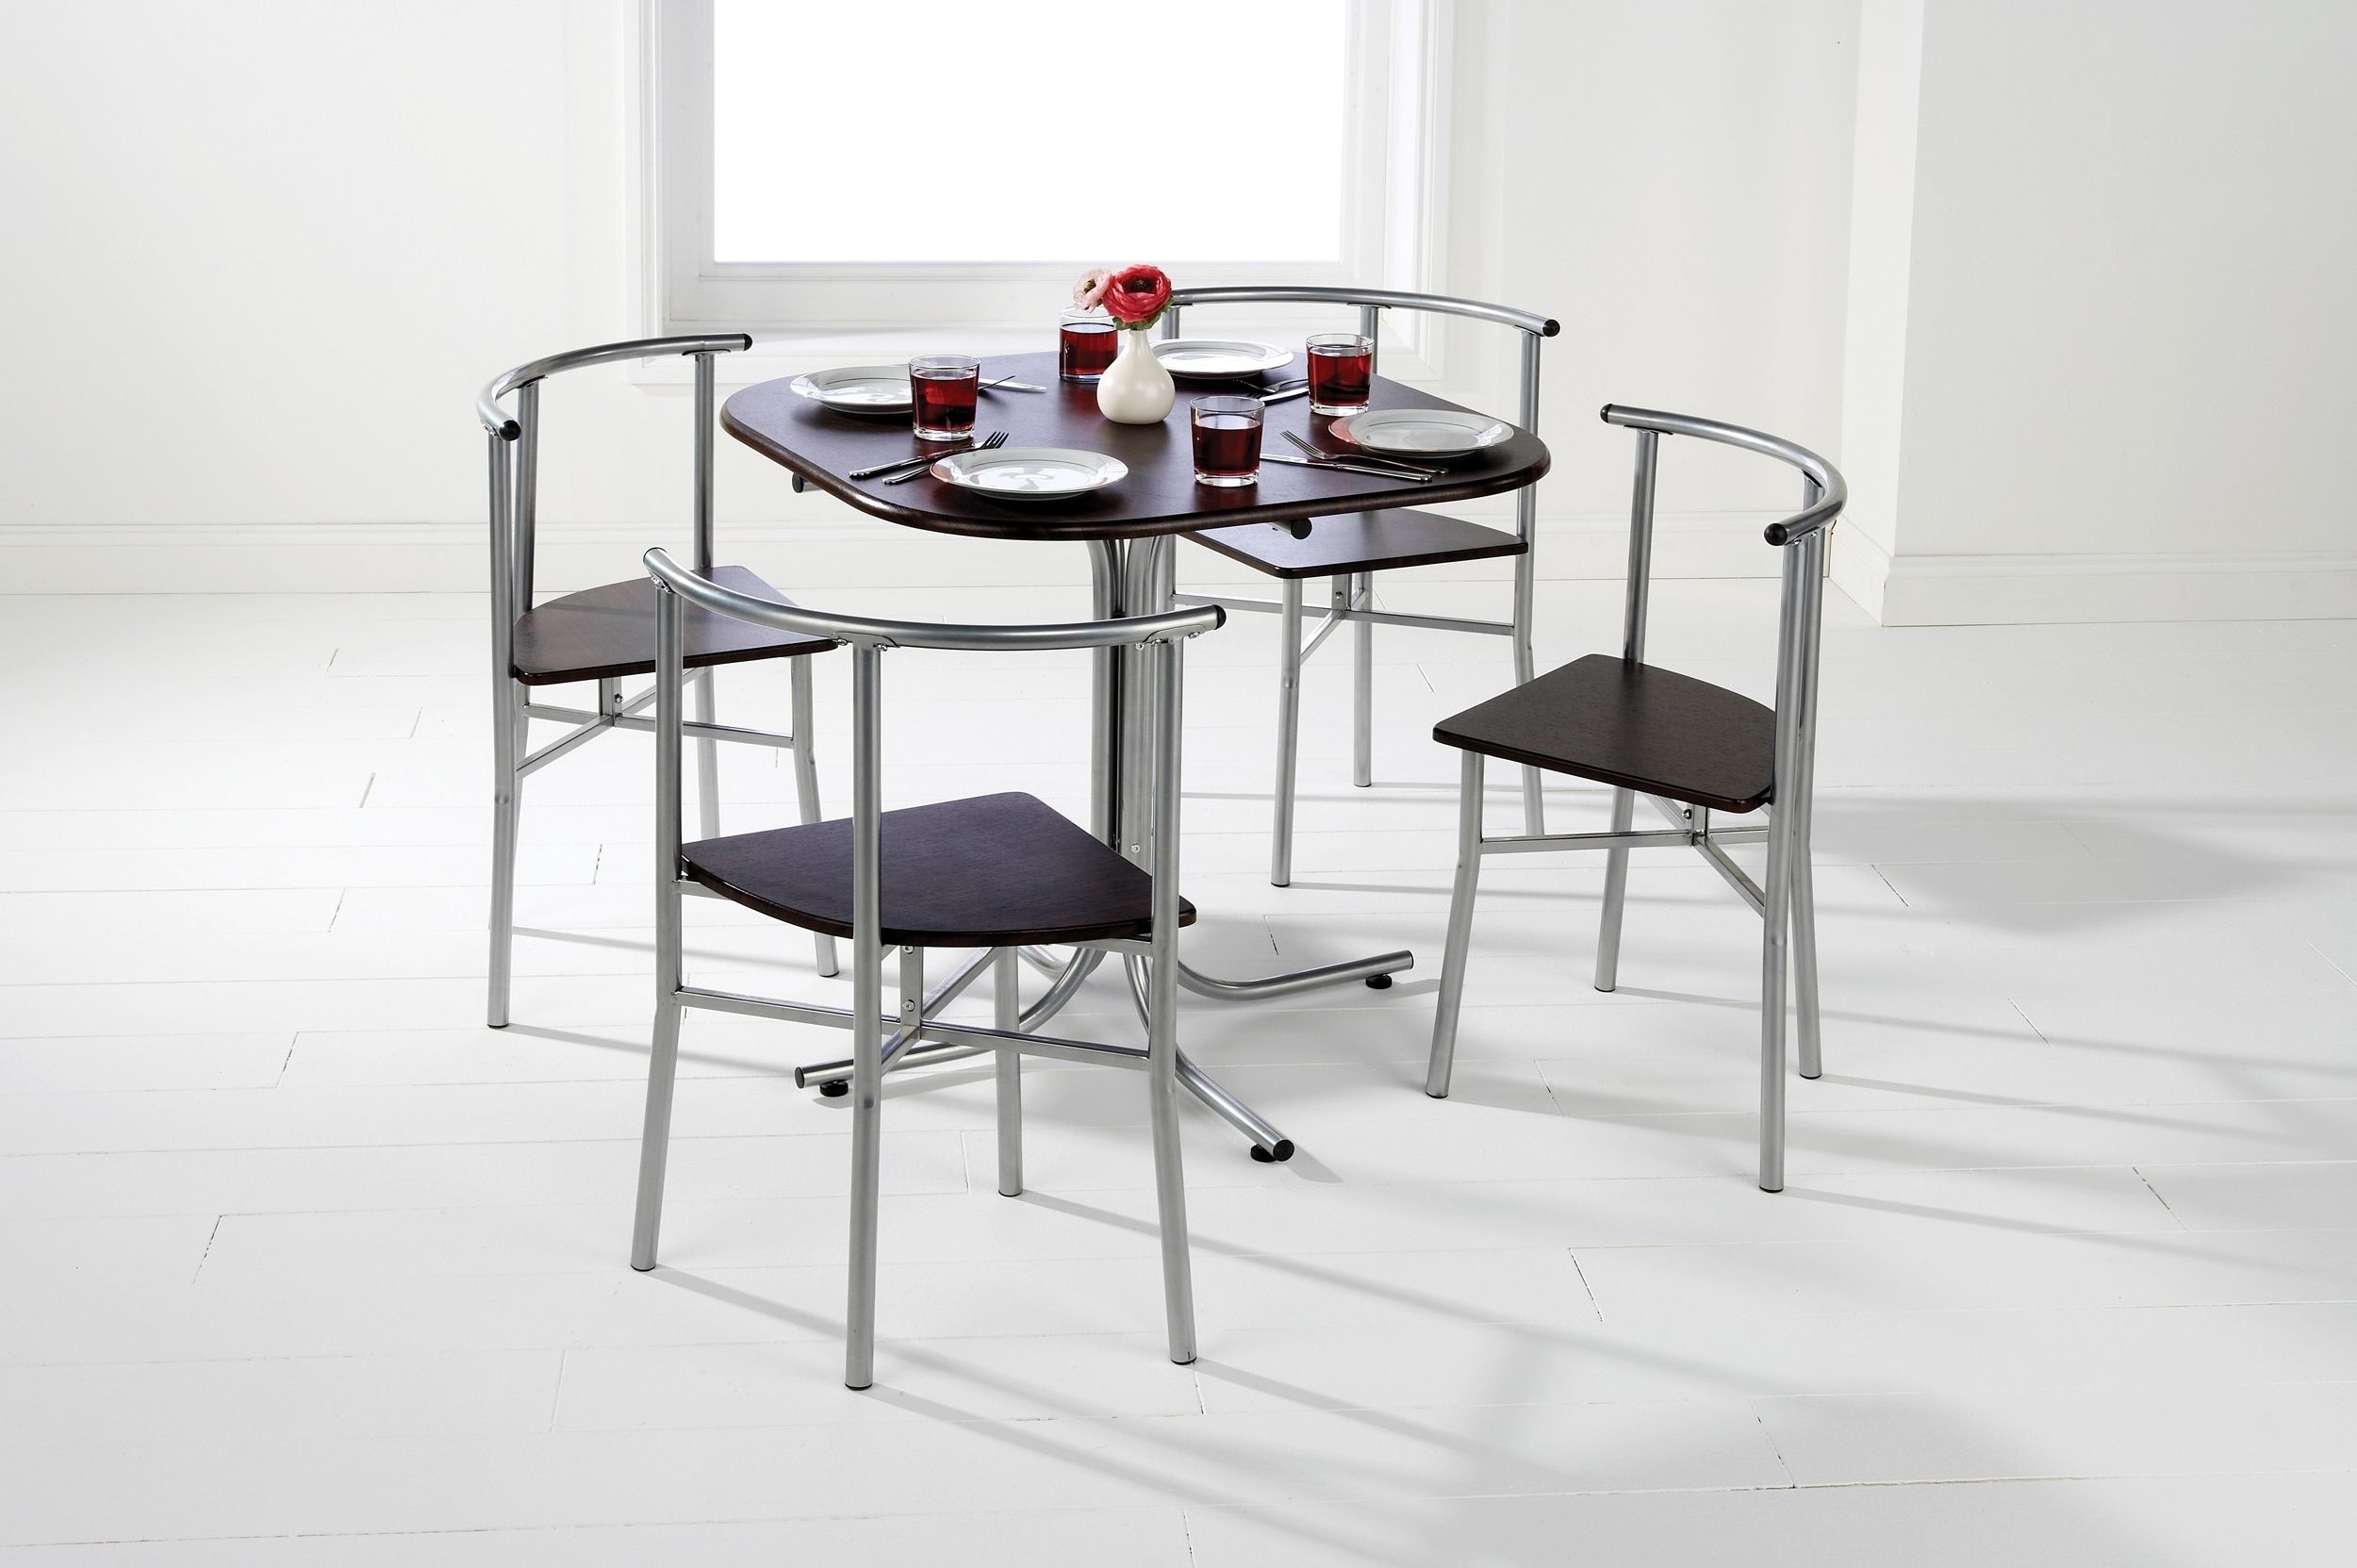 Space Saving Table And Chairs Visualhunt, Used Dining Table And High Back Chairs 2 Package